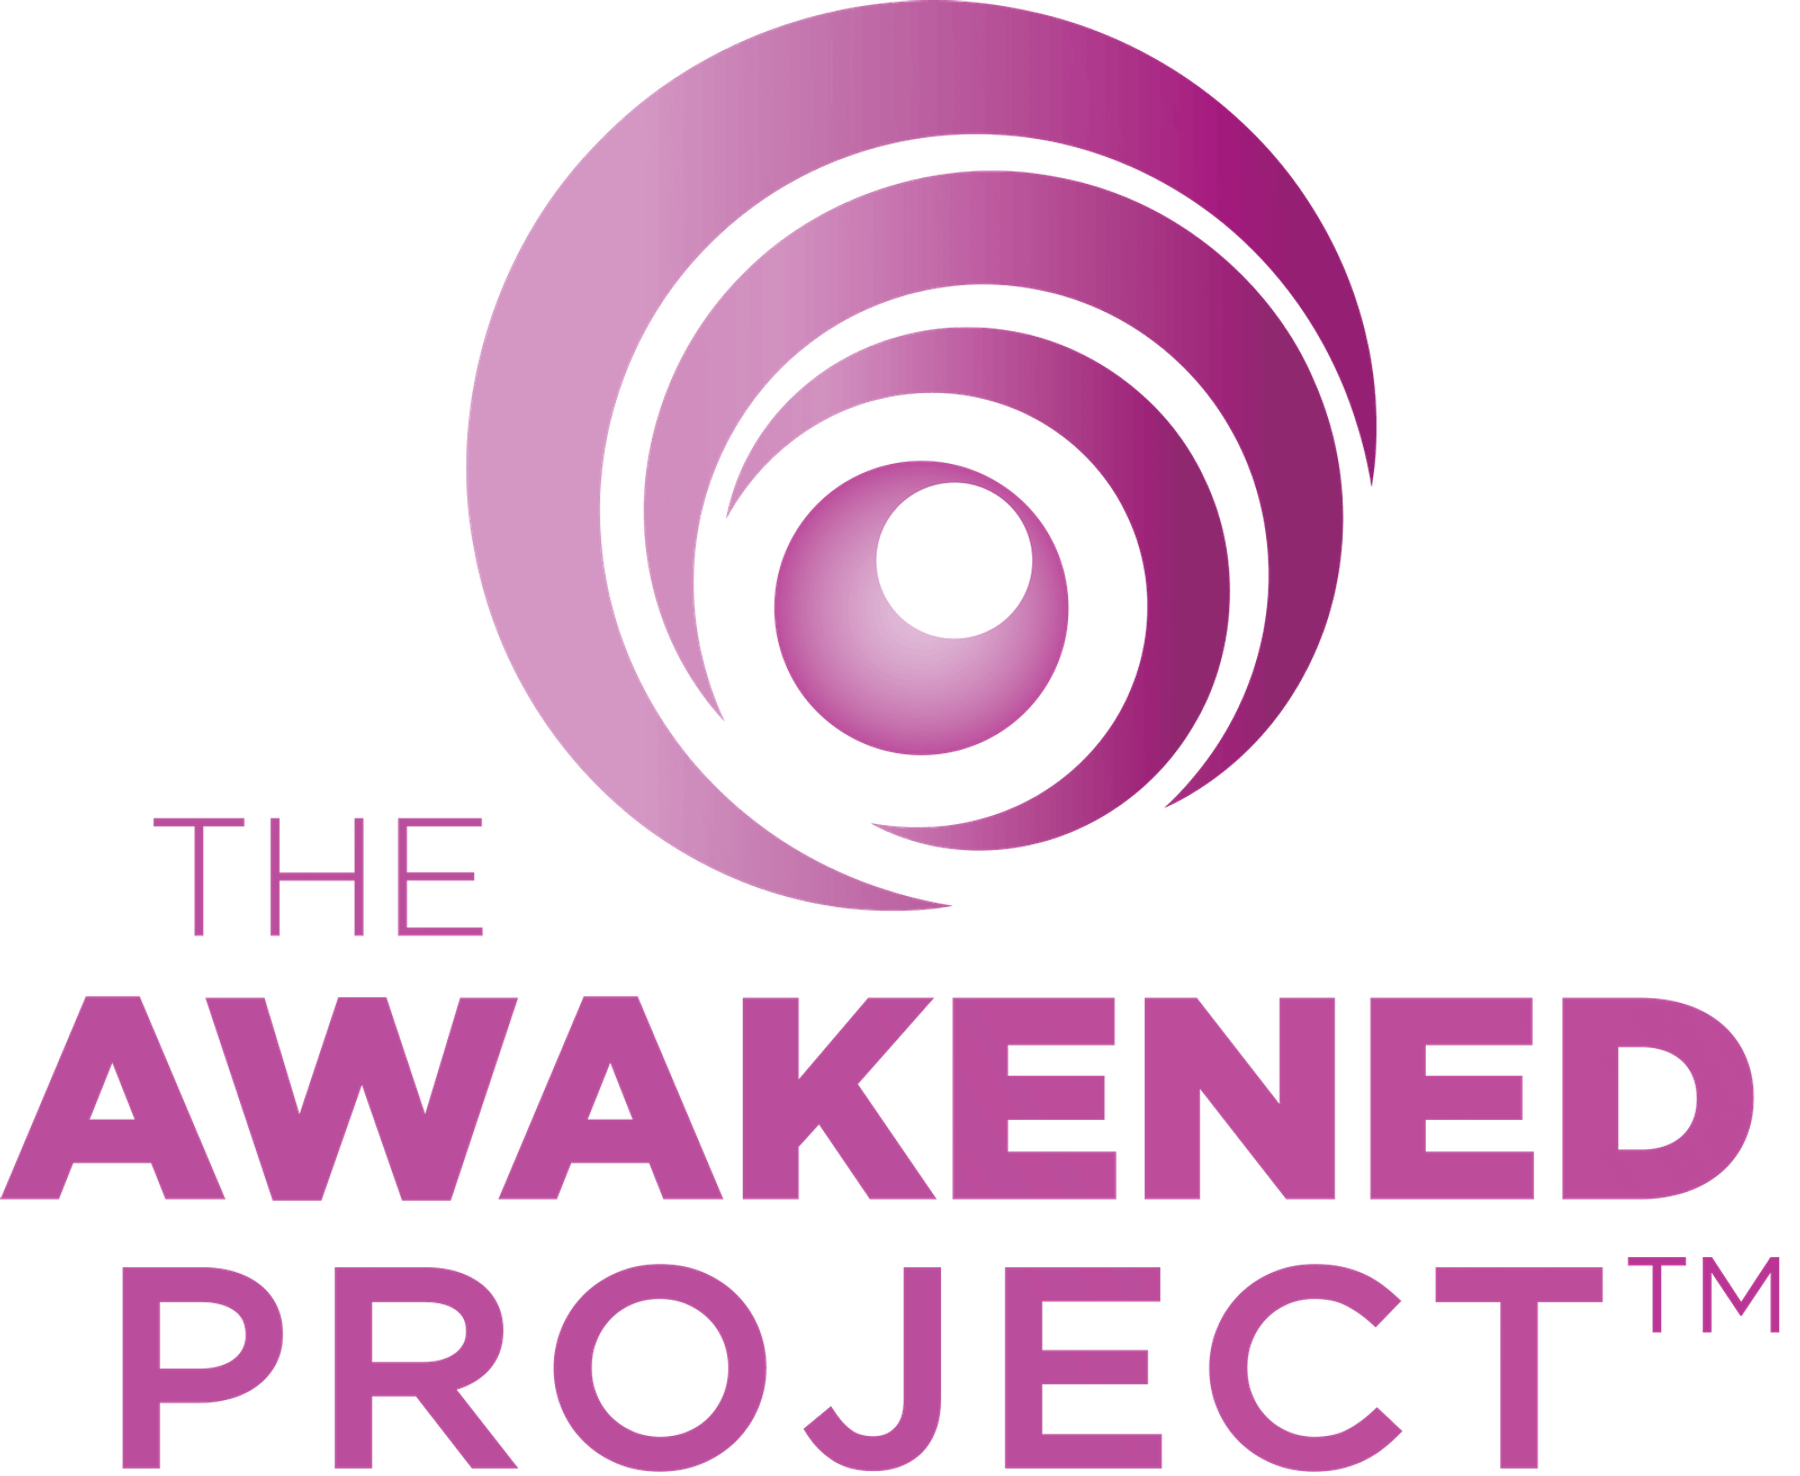 The Awakened Project logo on a transparent background